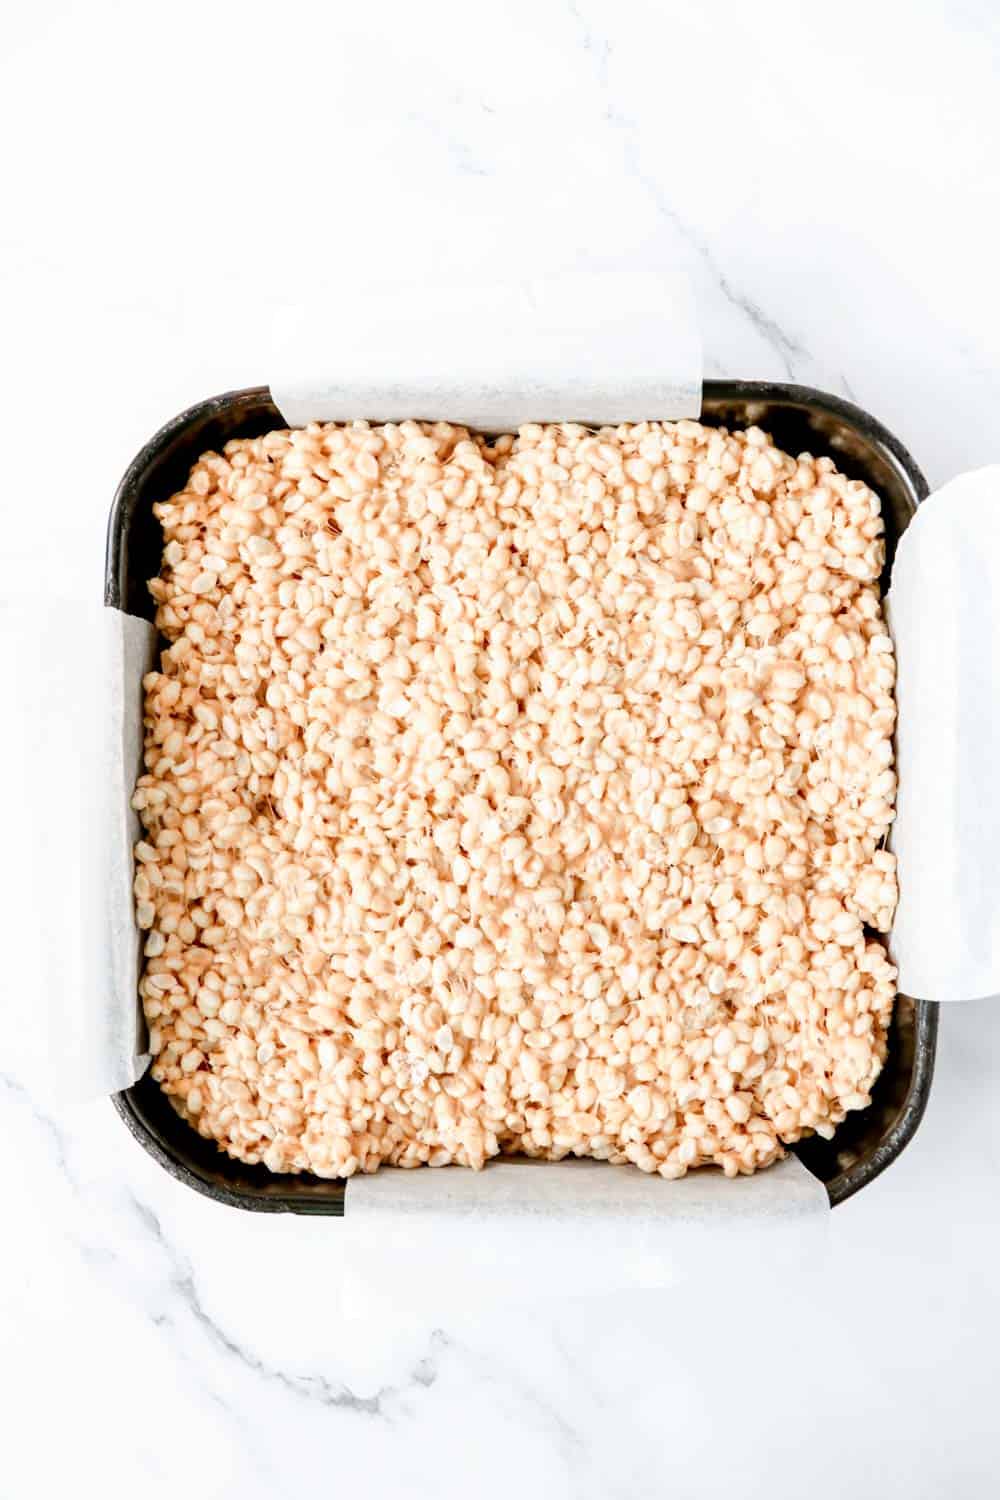 peanut butter rice crispies in tray